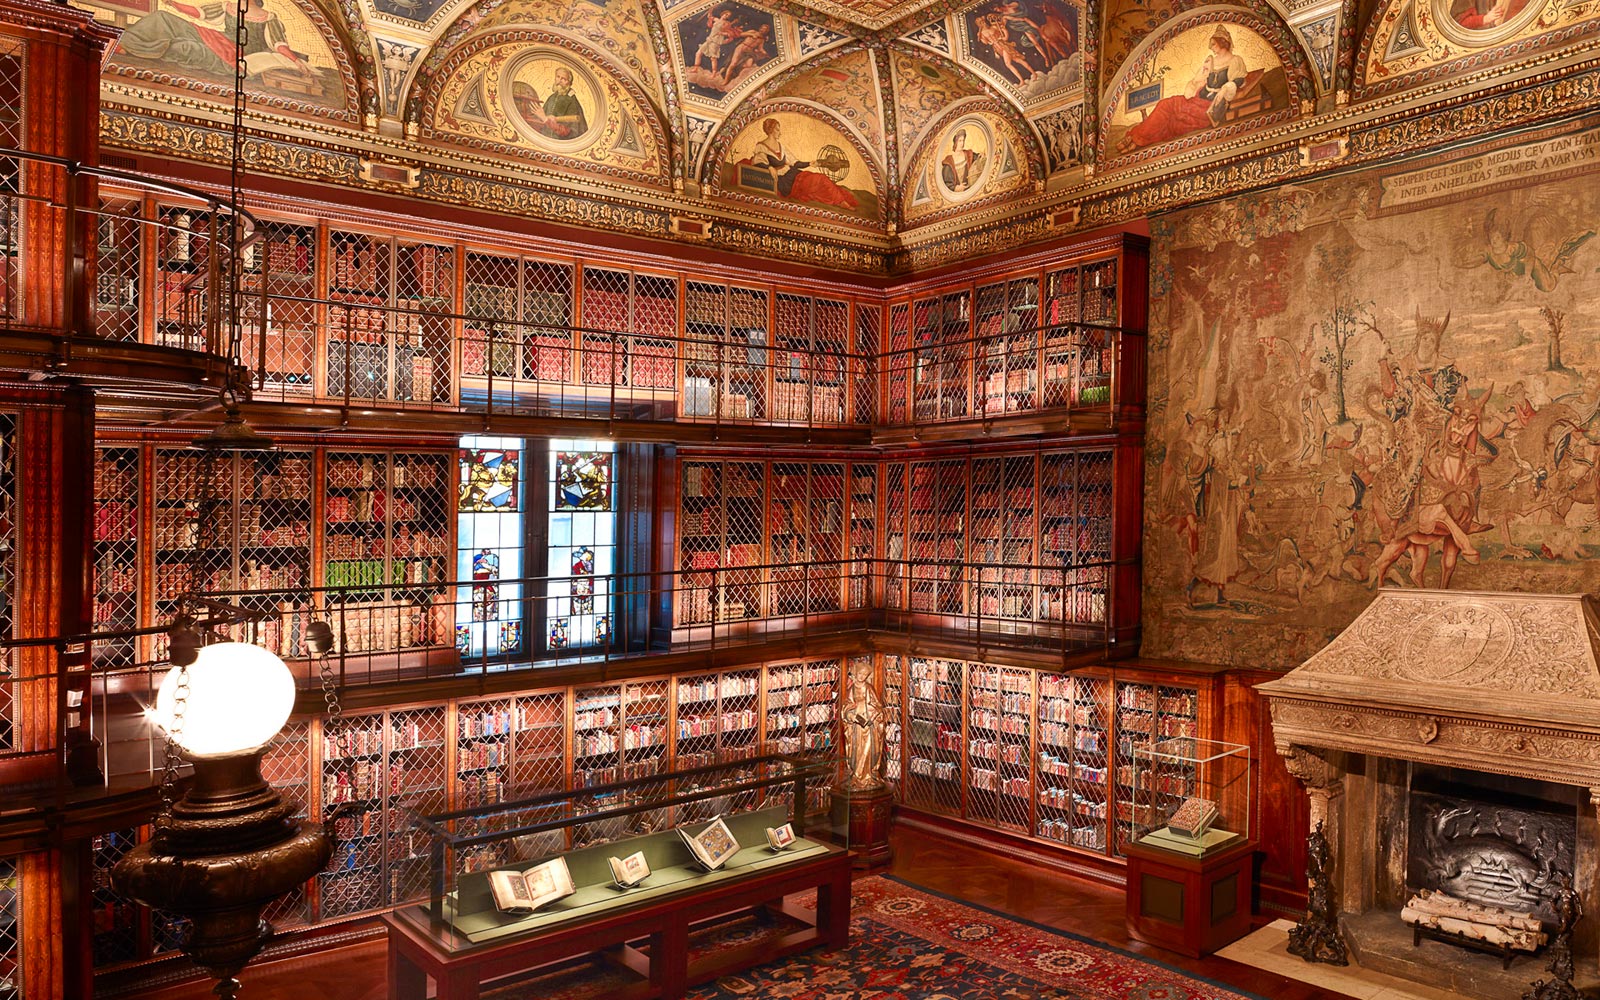 This is a beautiful library, with a high ceiling and ornately decorated walls and ceiling. The bookshelves are lined with red and gold painted wood, and are filled with books of all sizes. The room is filled with light from the large centrally placed window. There is a large fireplace in the center of the room.